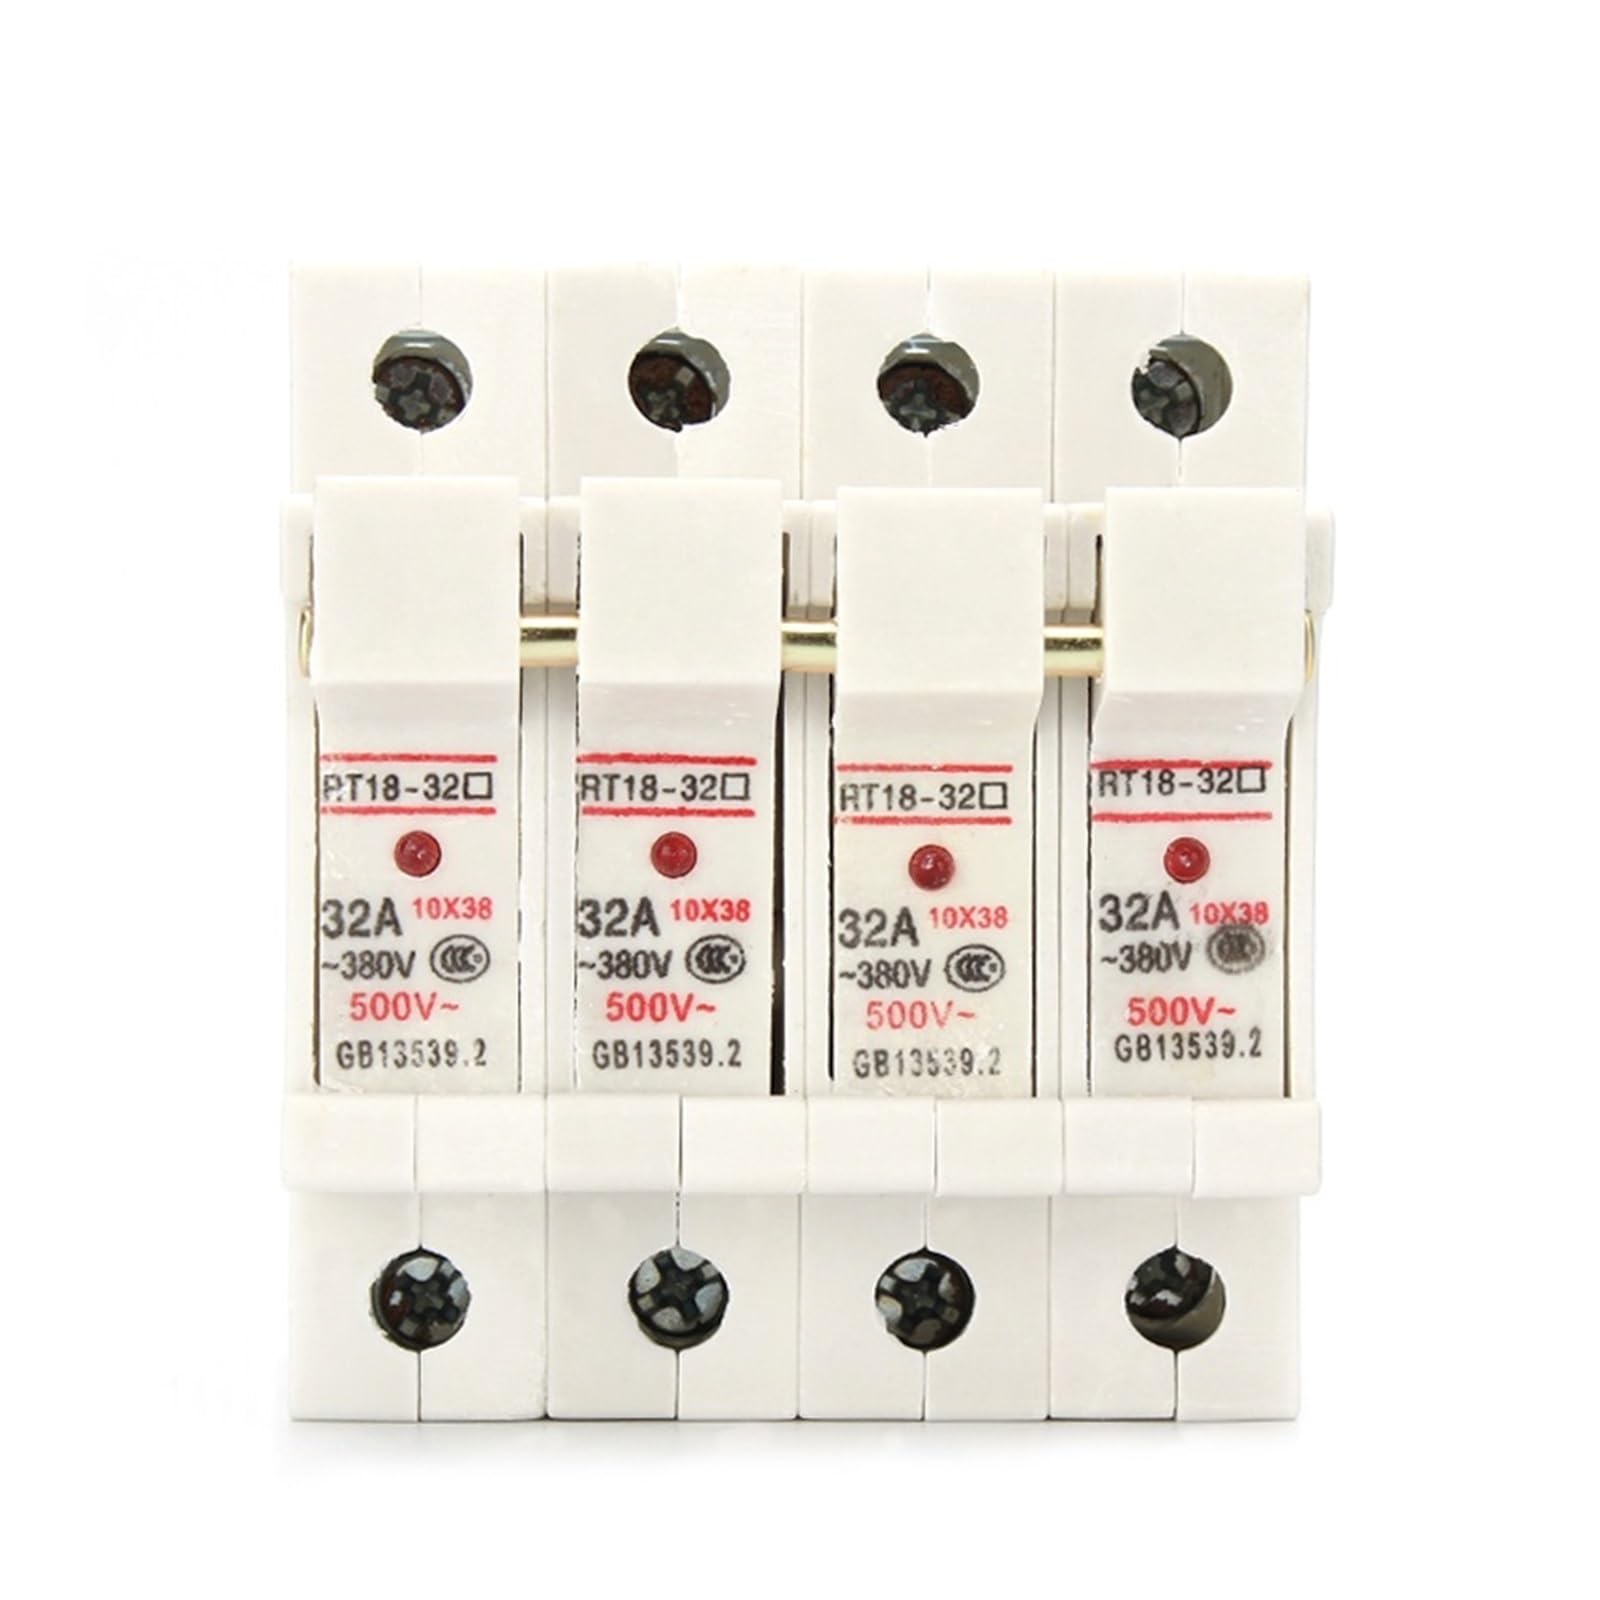 1P 2P 3P 4P RT18-32X AC ~380V Copper Fuse Holder 500V 10x38mm DIN rail mounting Fuse holder bottom adapter with Fuse RUAJOGYNVM(1A,4P) von RUAJOGYNVM